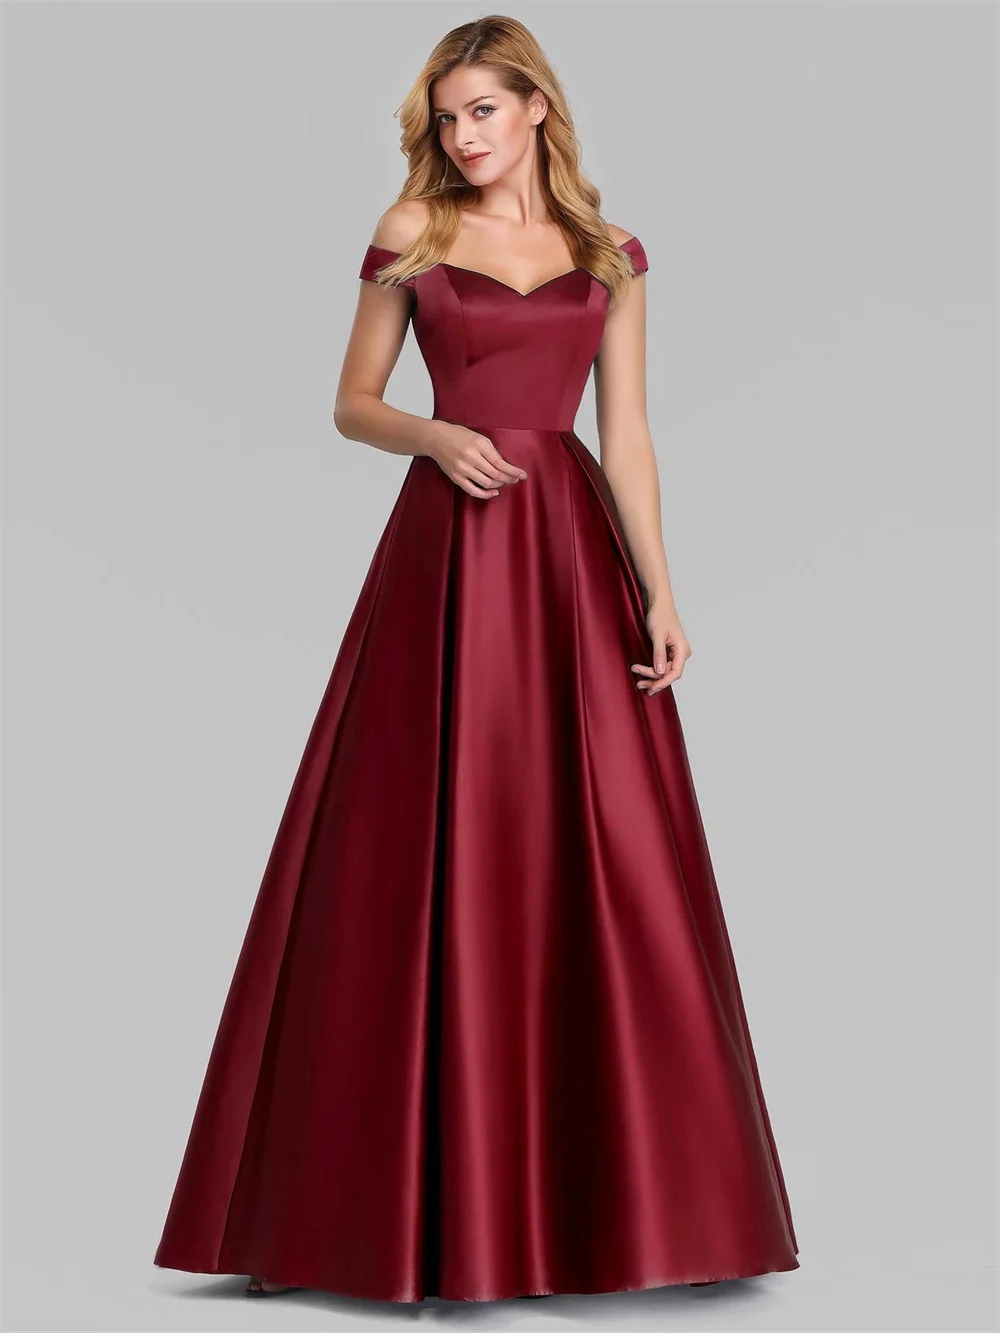 Elegant Women Evening Party Dress 2023 New in Sexy V-neck High Waist Maxi Gowns Ladies Boutique Prom Quinceanera Dresses 2021 sexy v neck satin evening dresses spaghetti strap side slit prom dress high waist evening gowns party dress robe de soiree